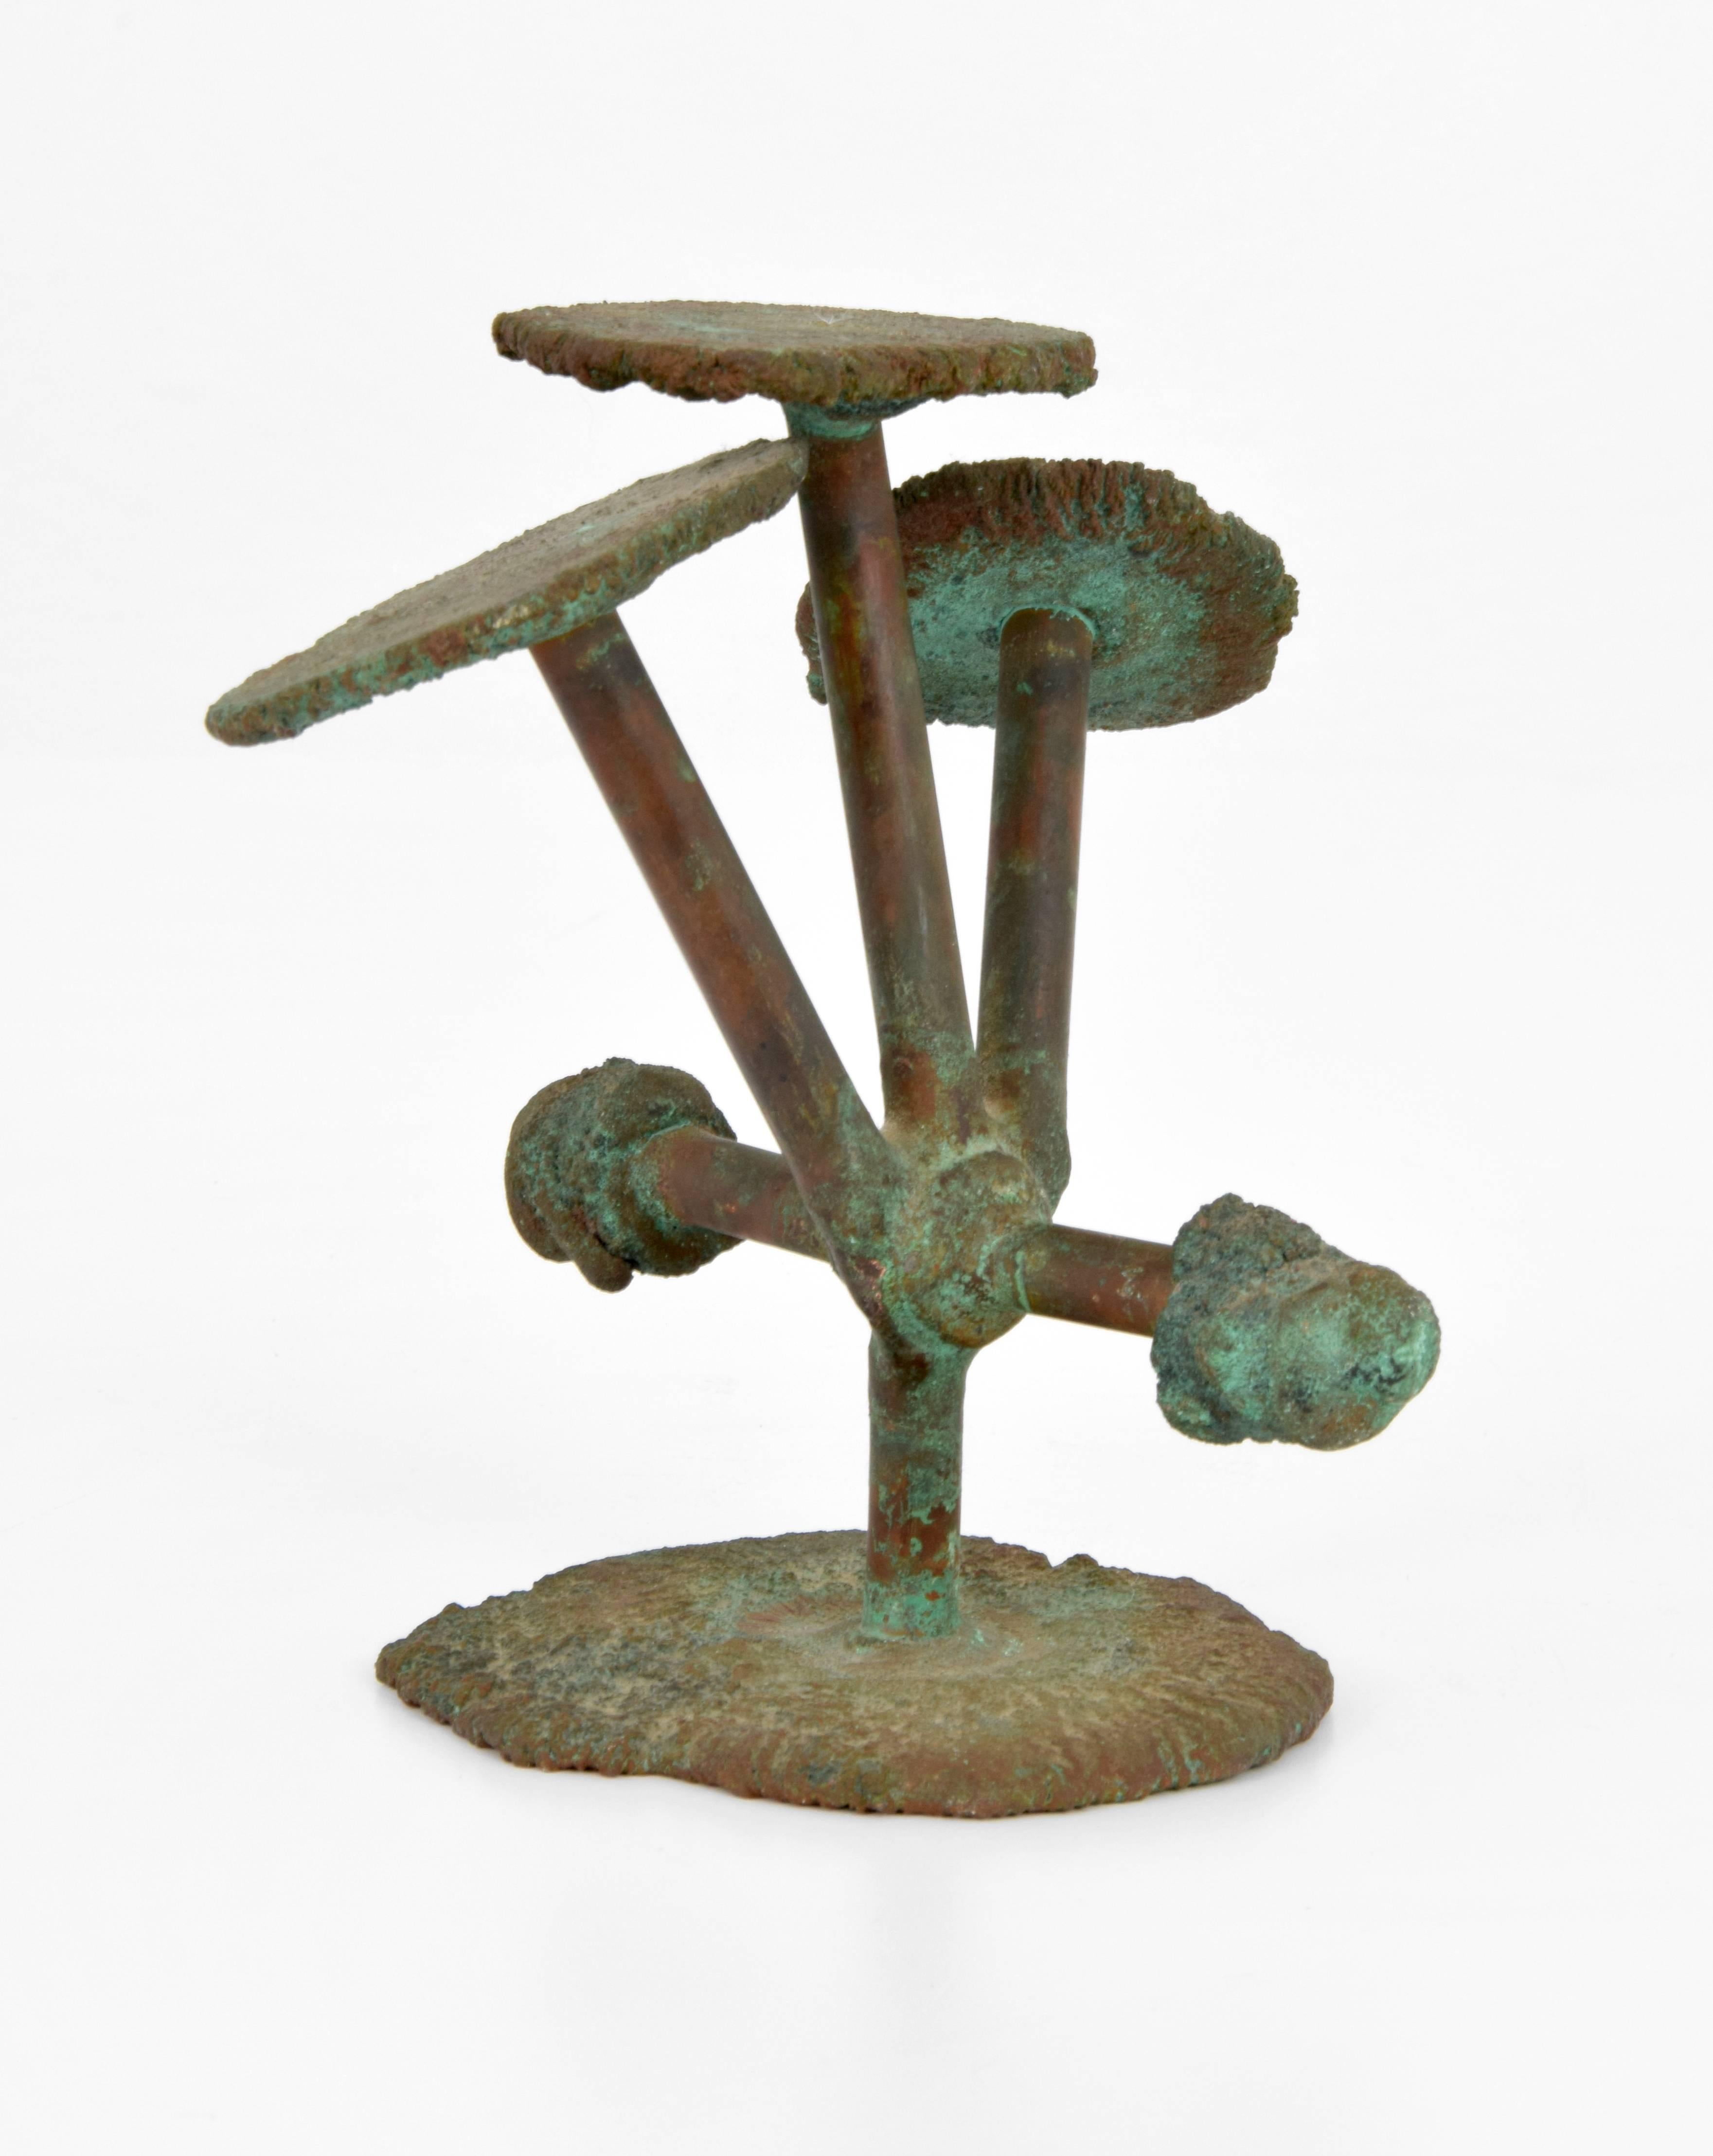 Bronze sculpture by Klaus Ihlenfeld (German/American, B 1934). Sculpture is initialled. Provenance: Artist; collection, Florida (previous owner purchased the sculpture between 1982-1985 directly from artist).